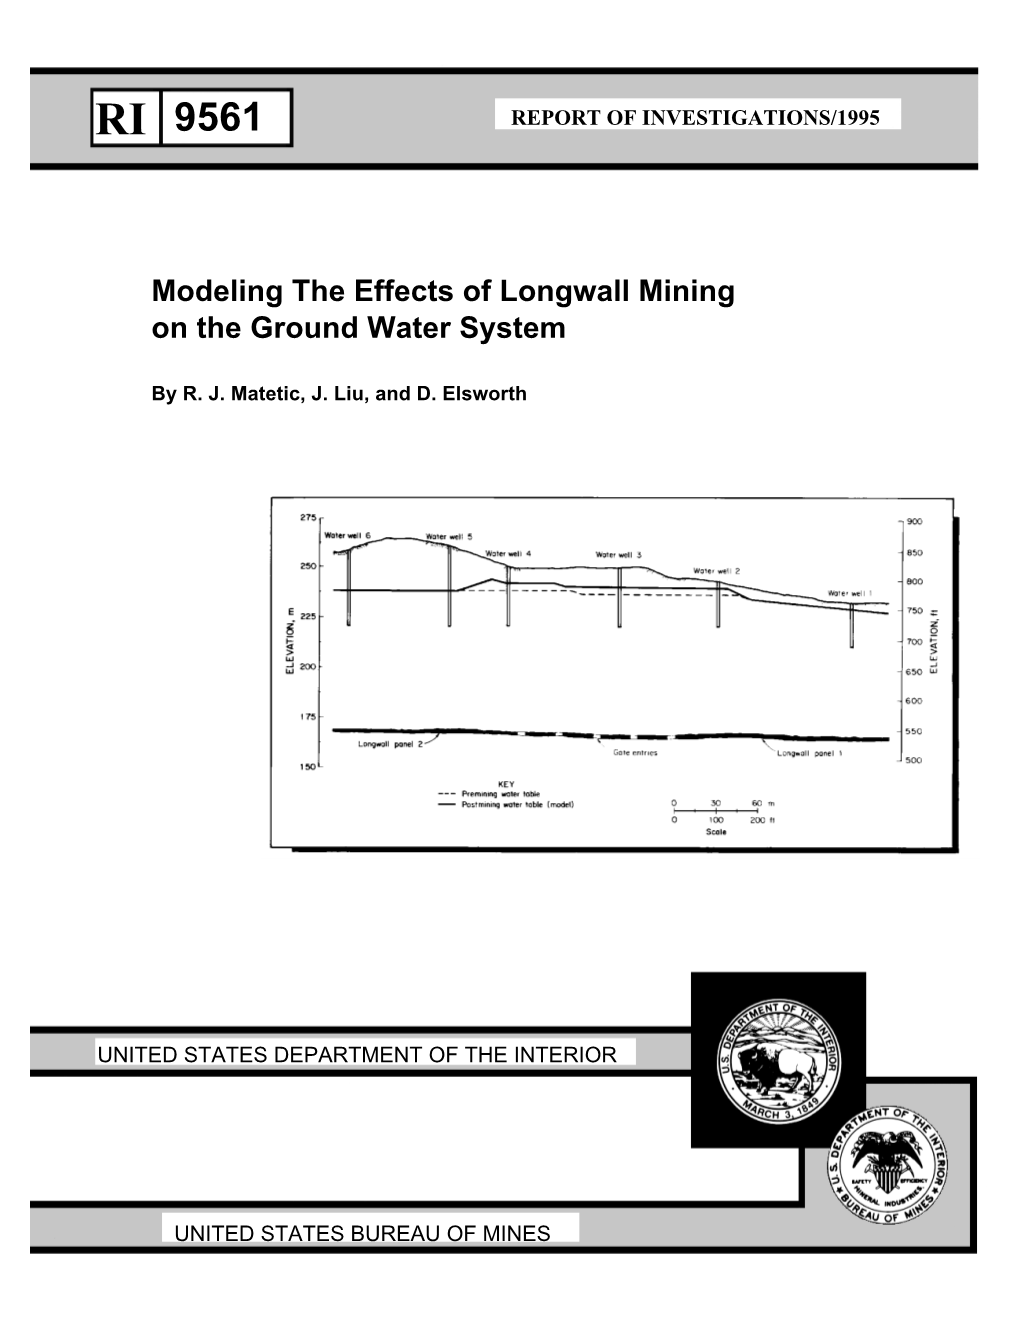 Modeling the Effects of Longwall Mining on the Ground Water System